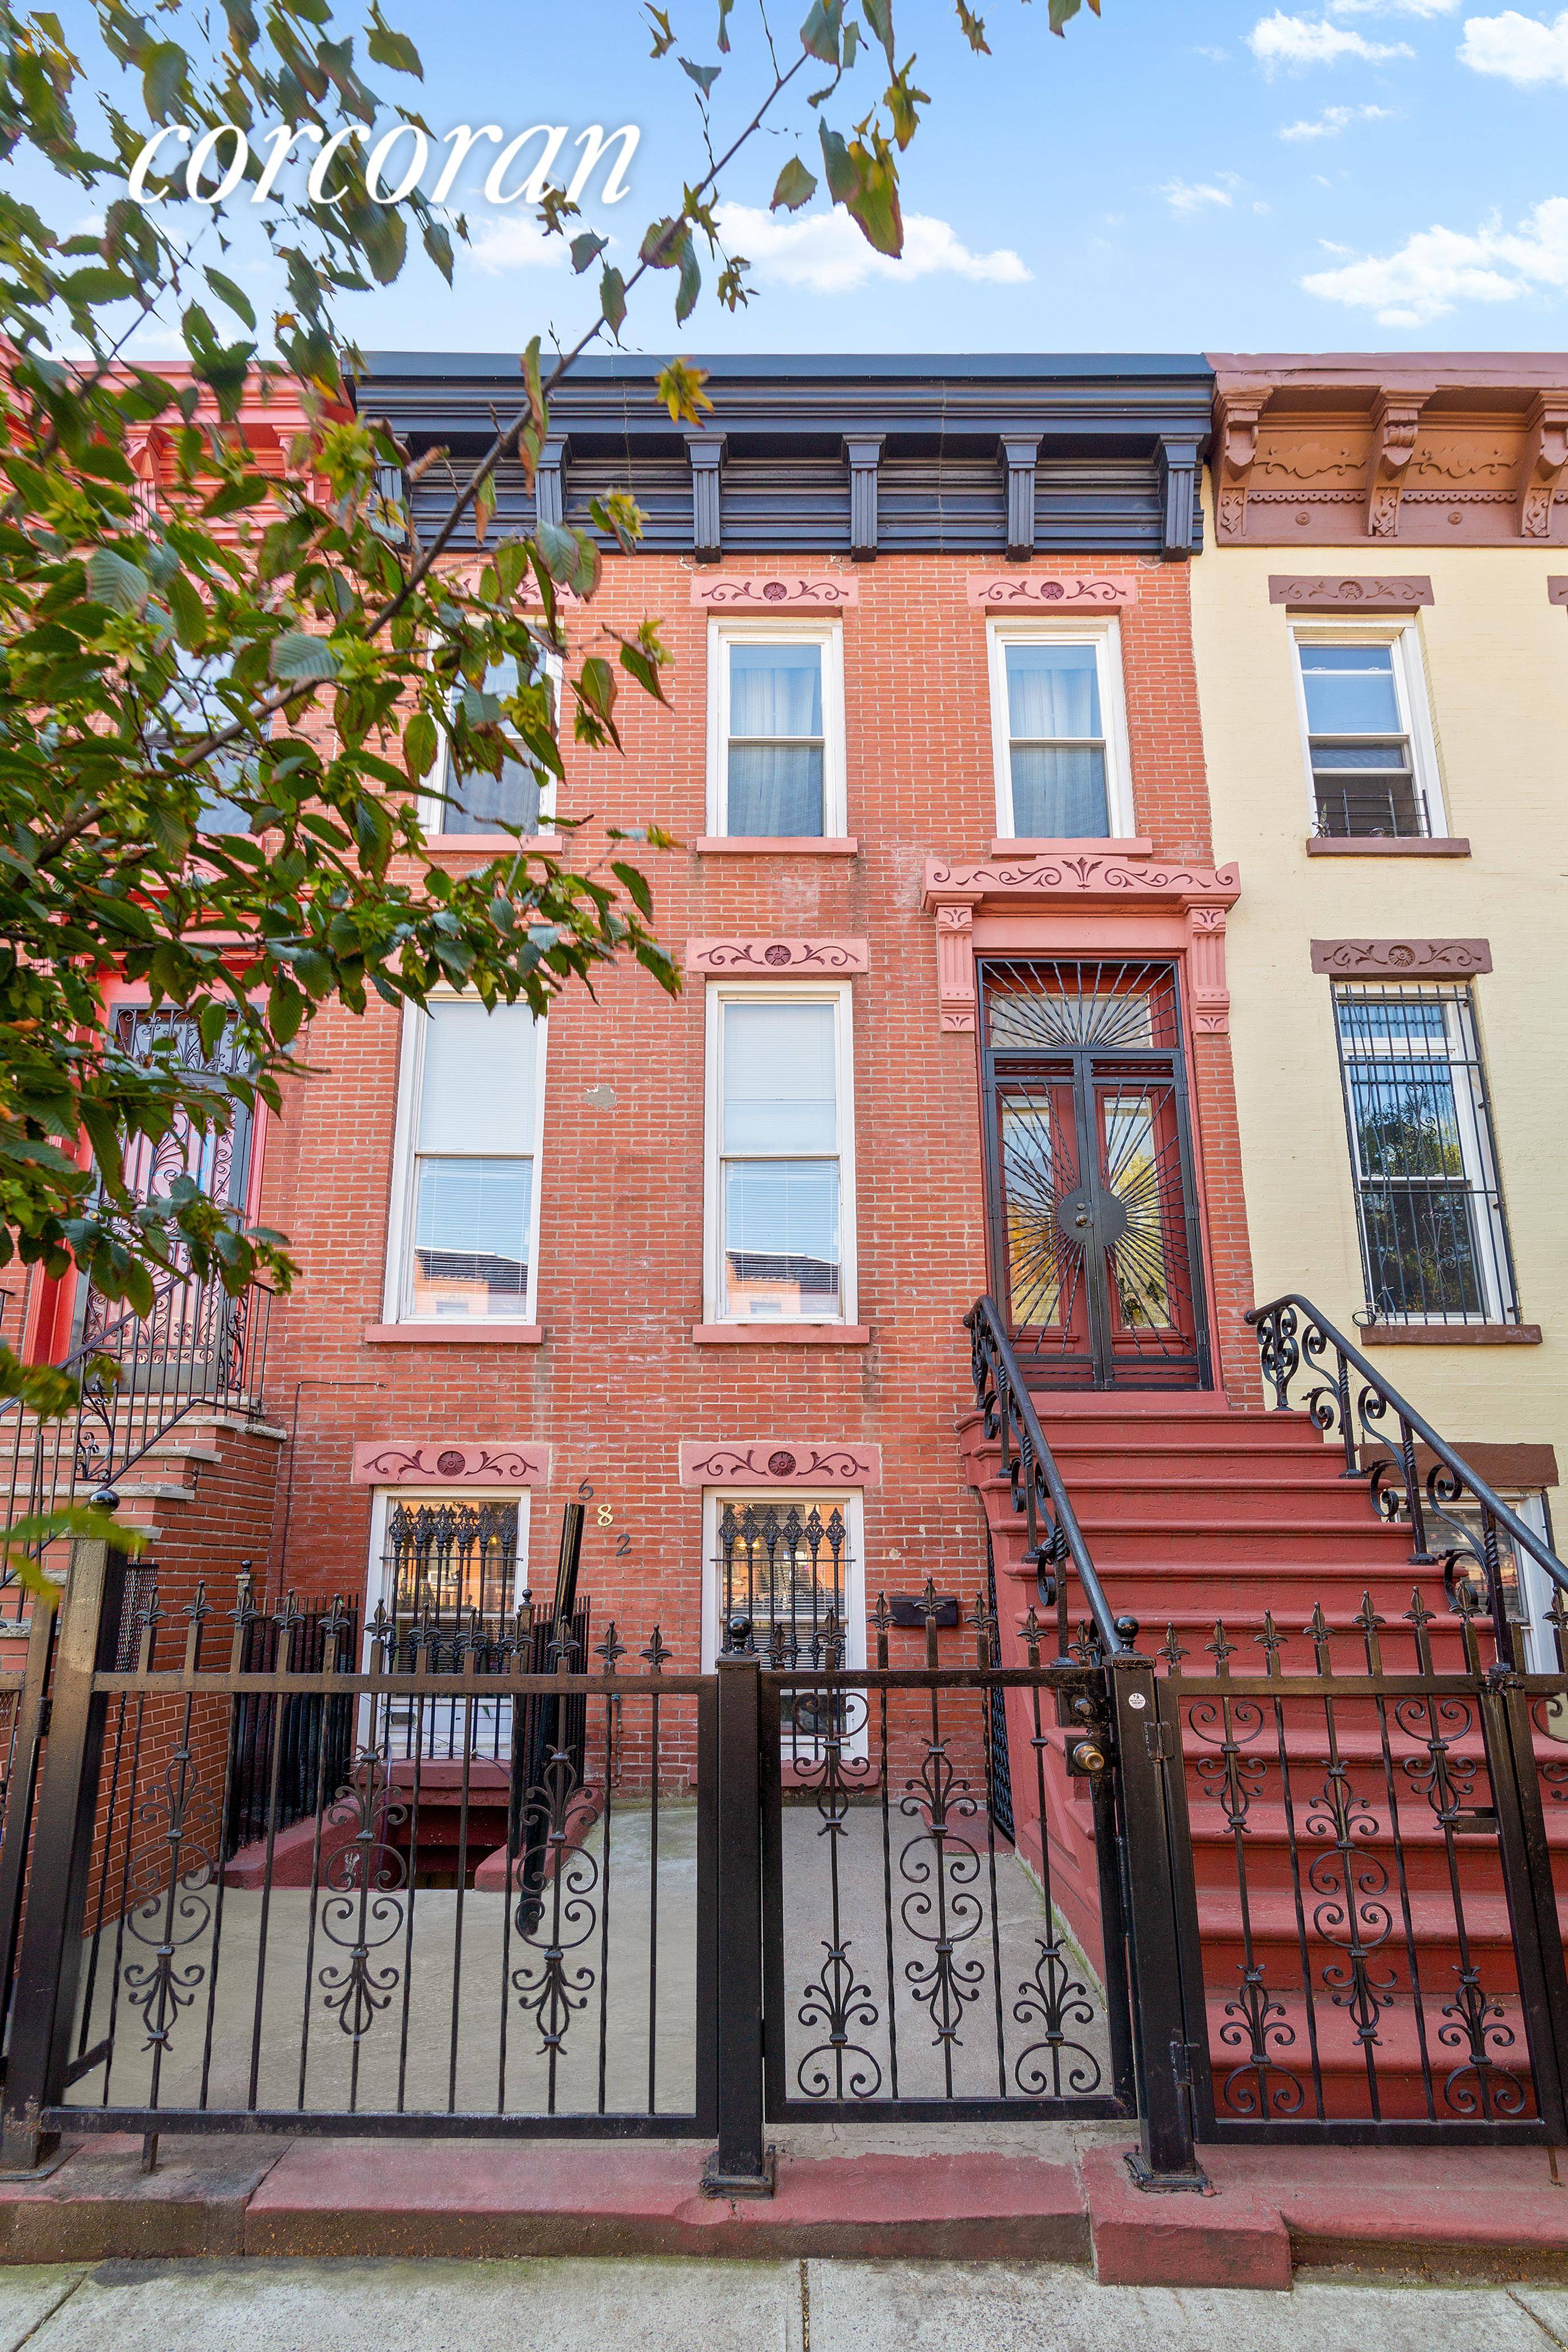 Built in 1899, 682 Halsey Street is an historic two family townhouse located in Bedford Stuyvesant.